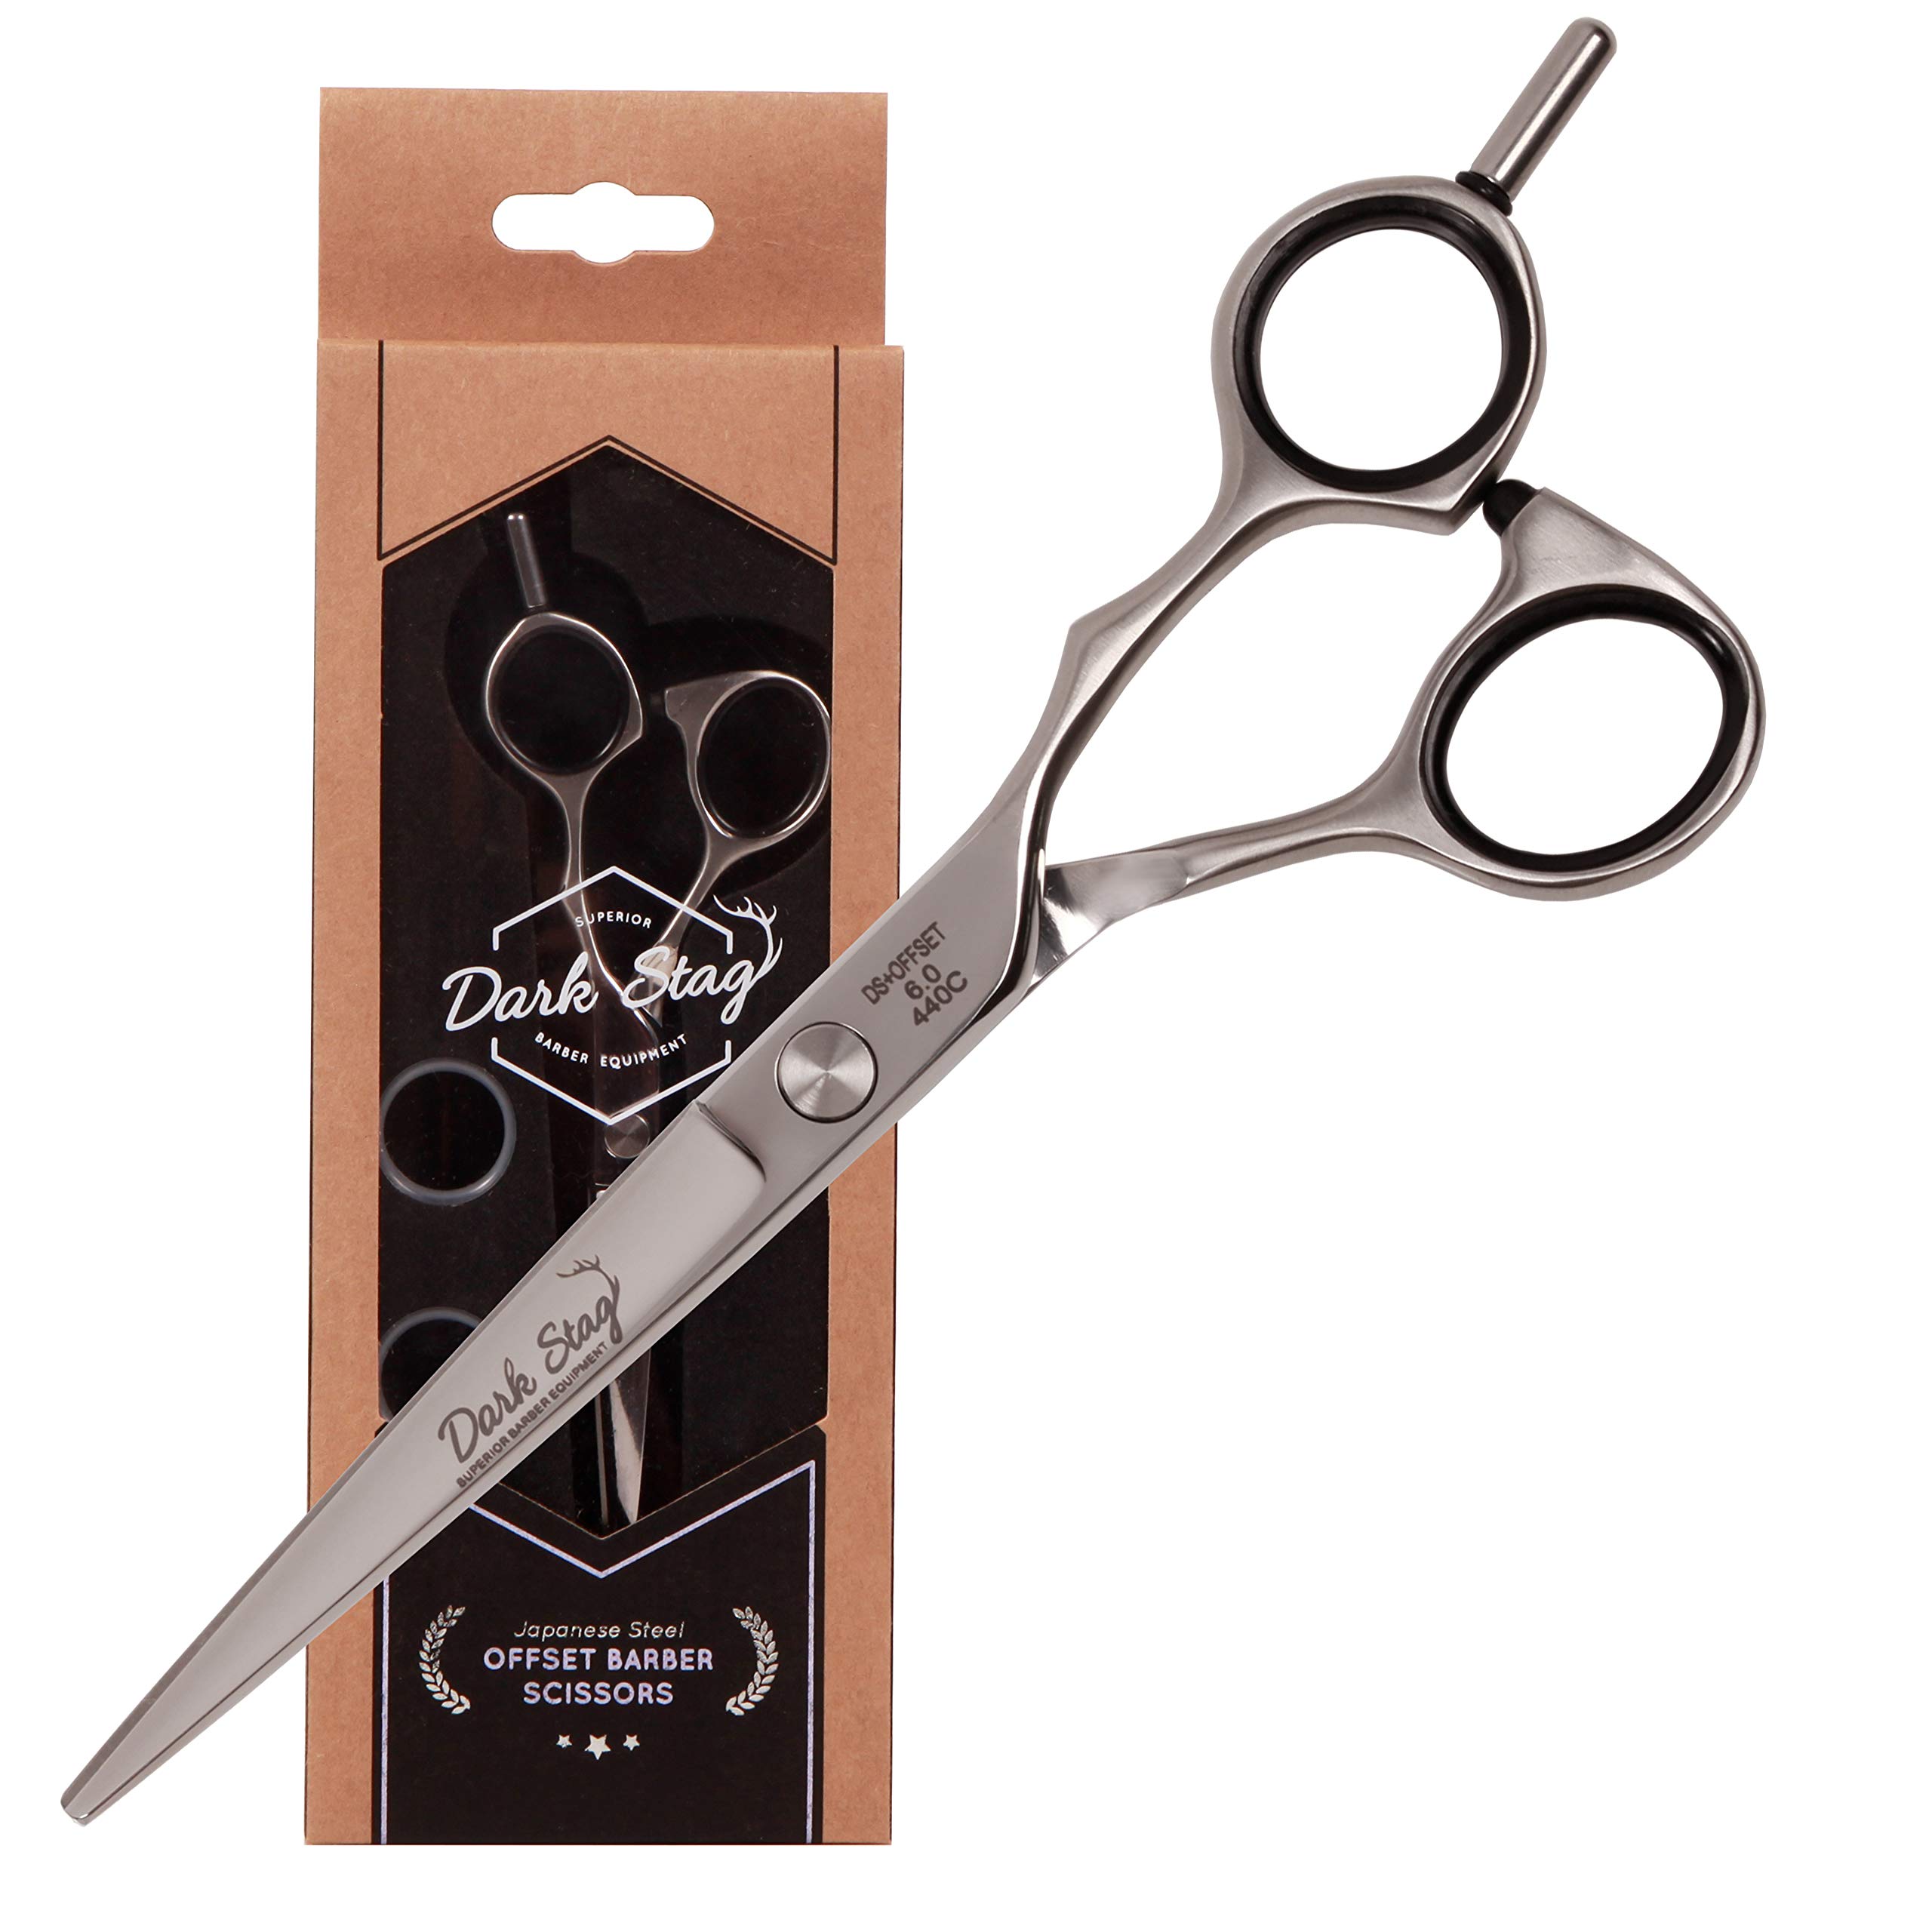 Dark Stag DS+ Offset convex razor edge professional barber scissor for professional hairdressers barbers. Stainless steel hair cutting shears. For salon barbers. - 7 inch